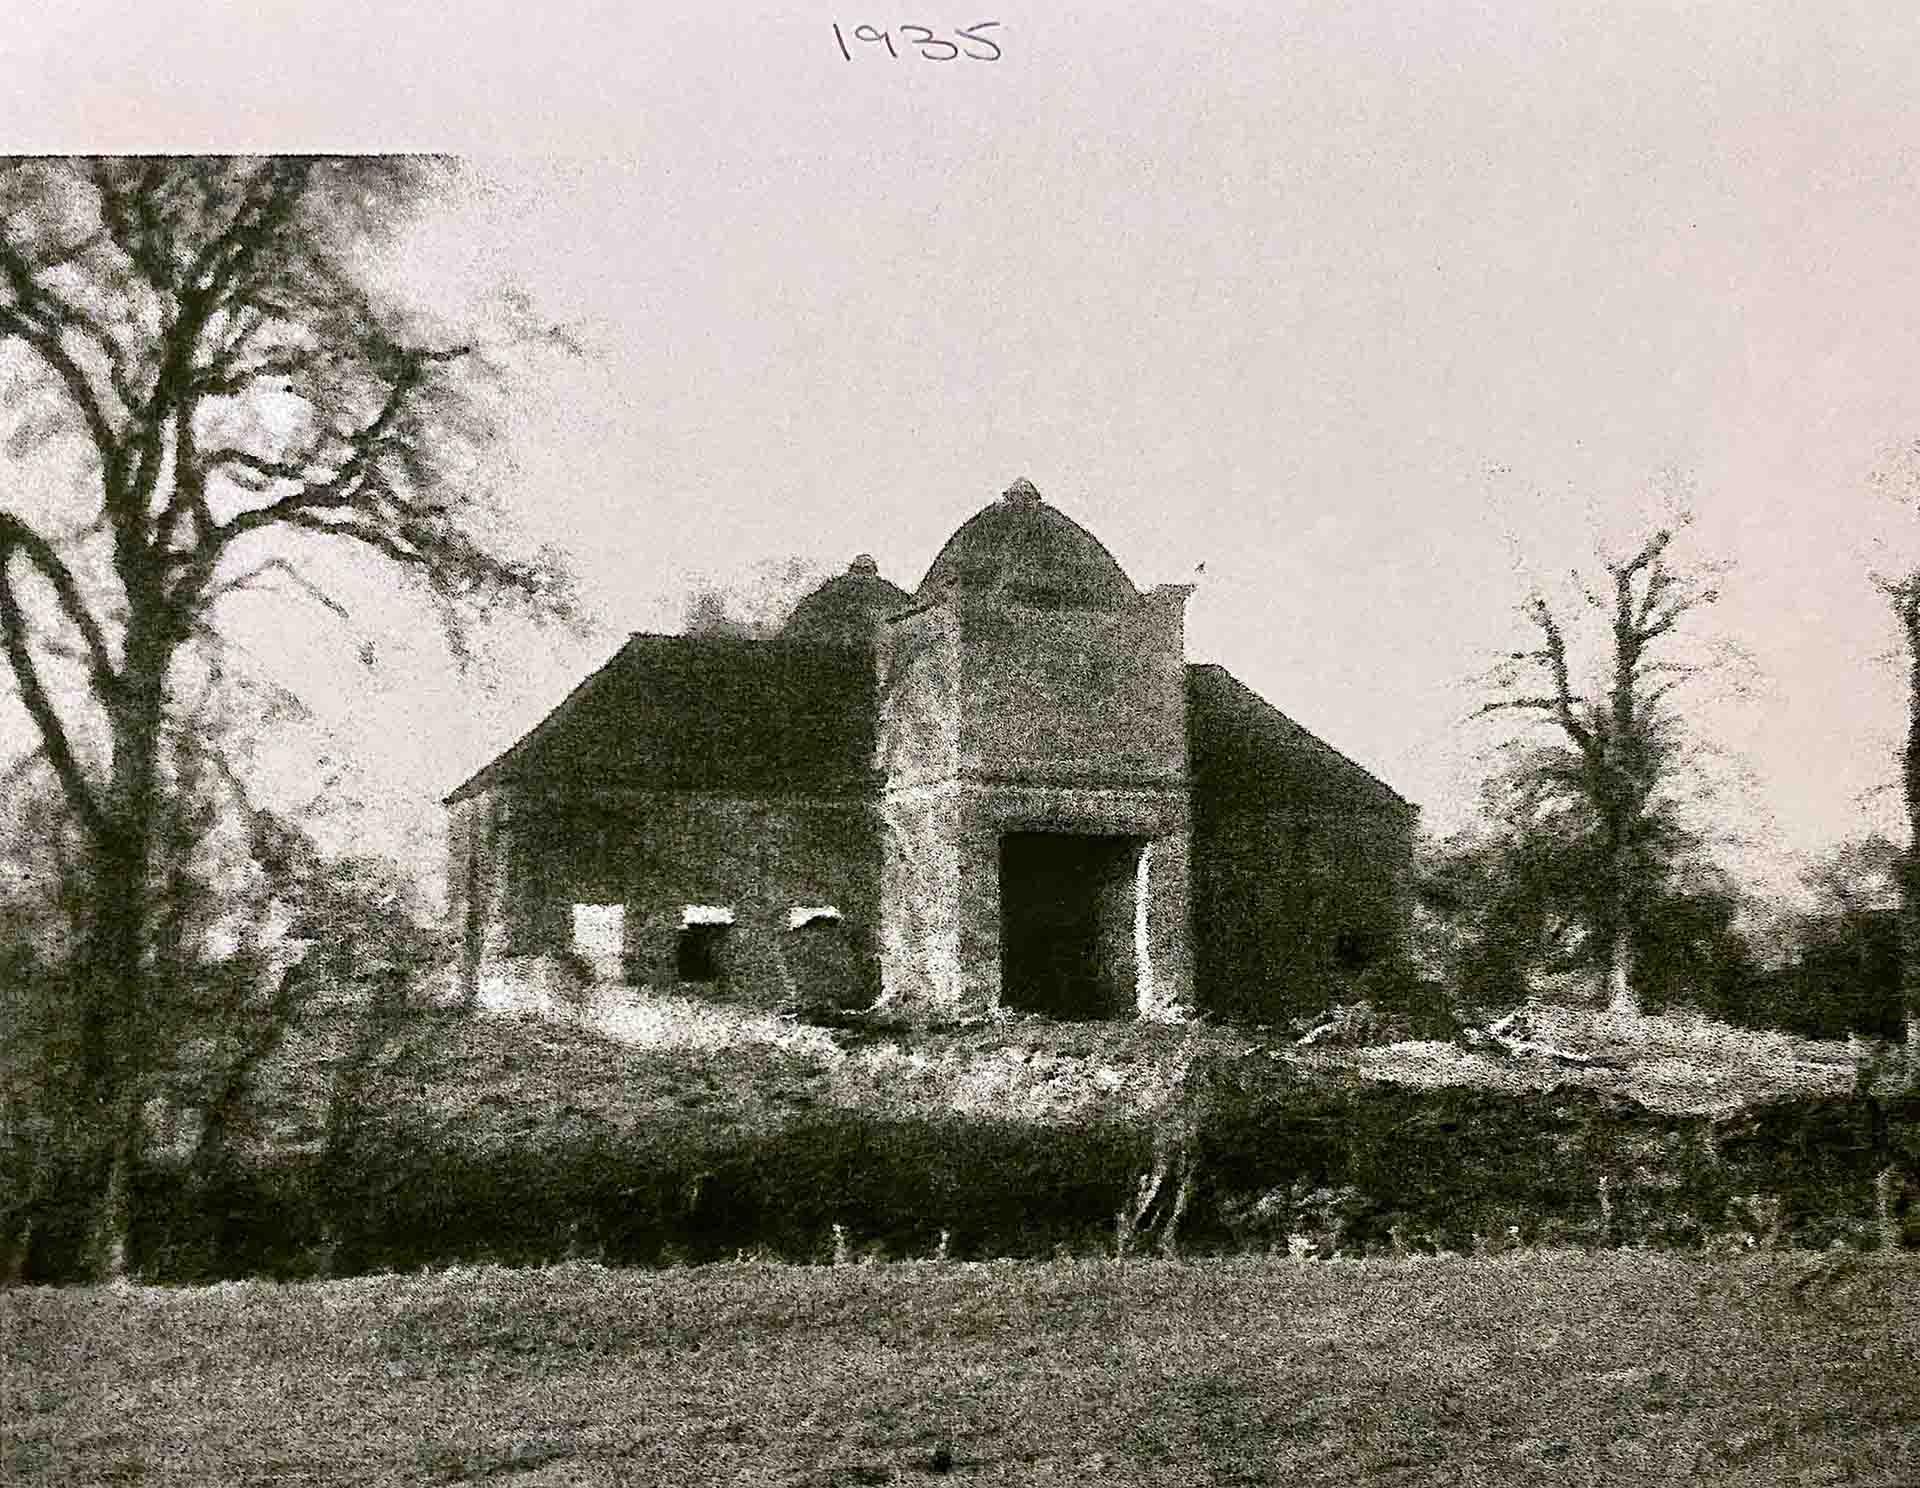 Hodges Barn In 1935